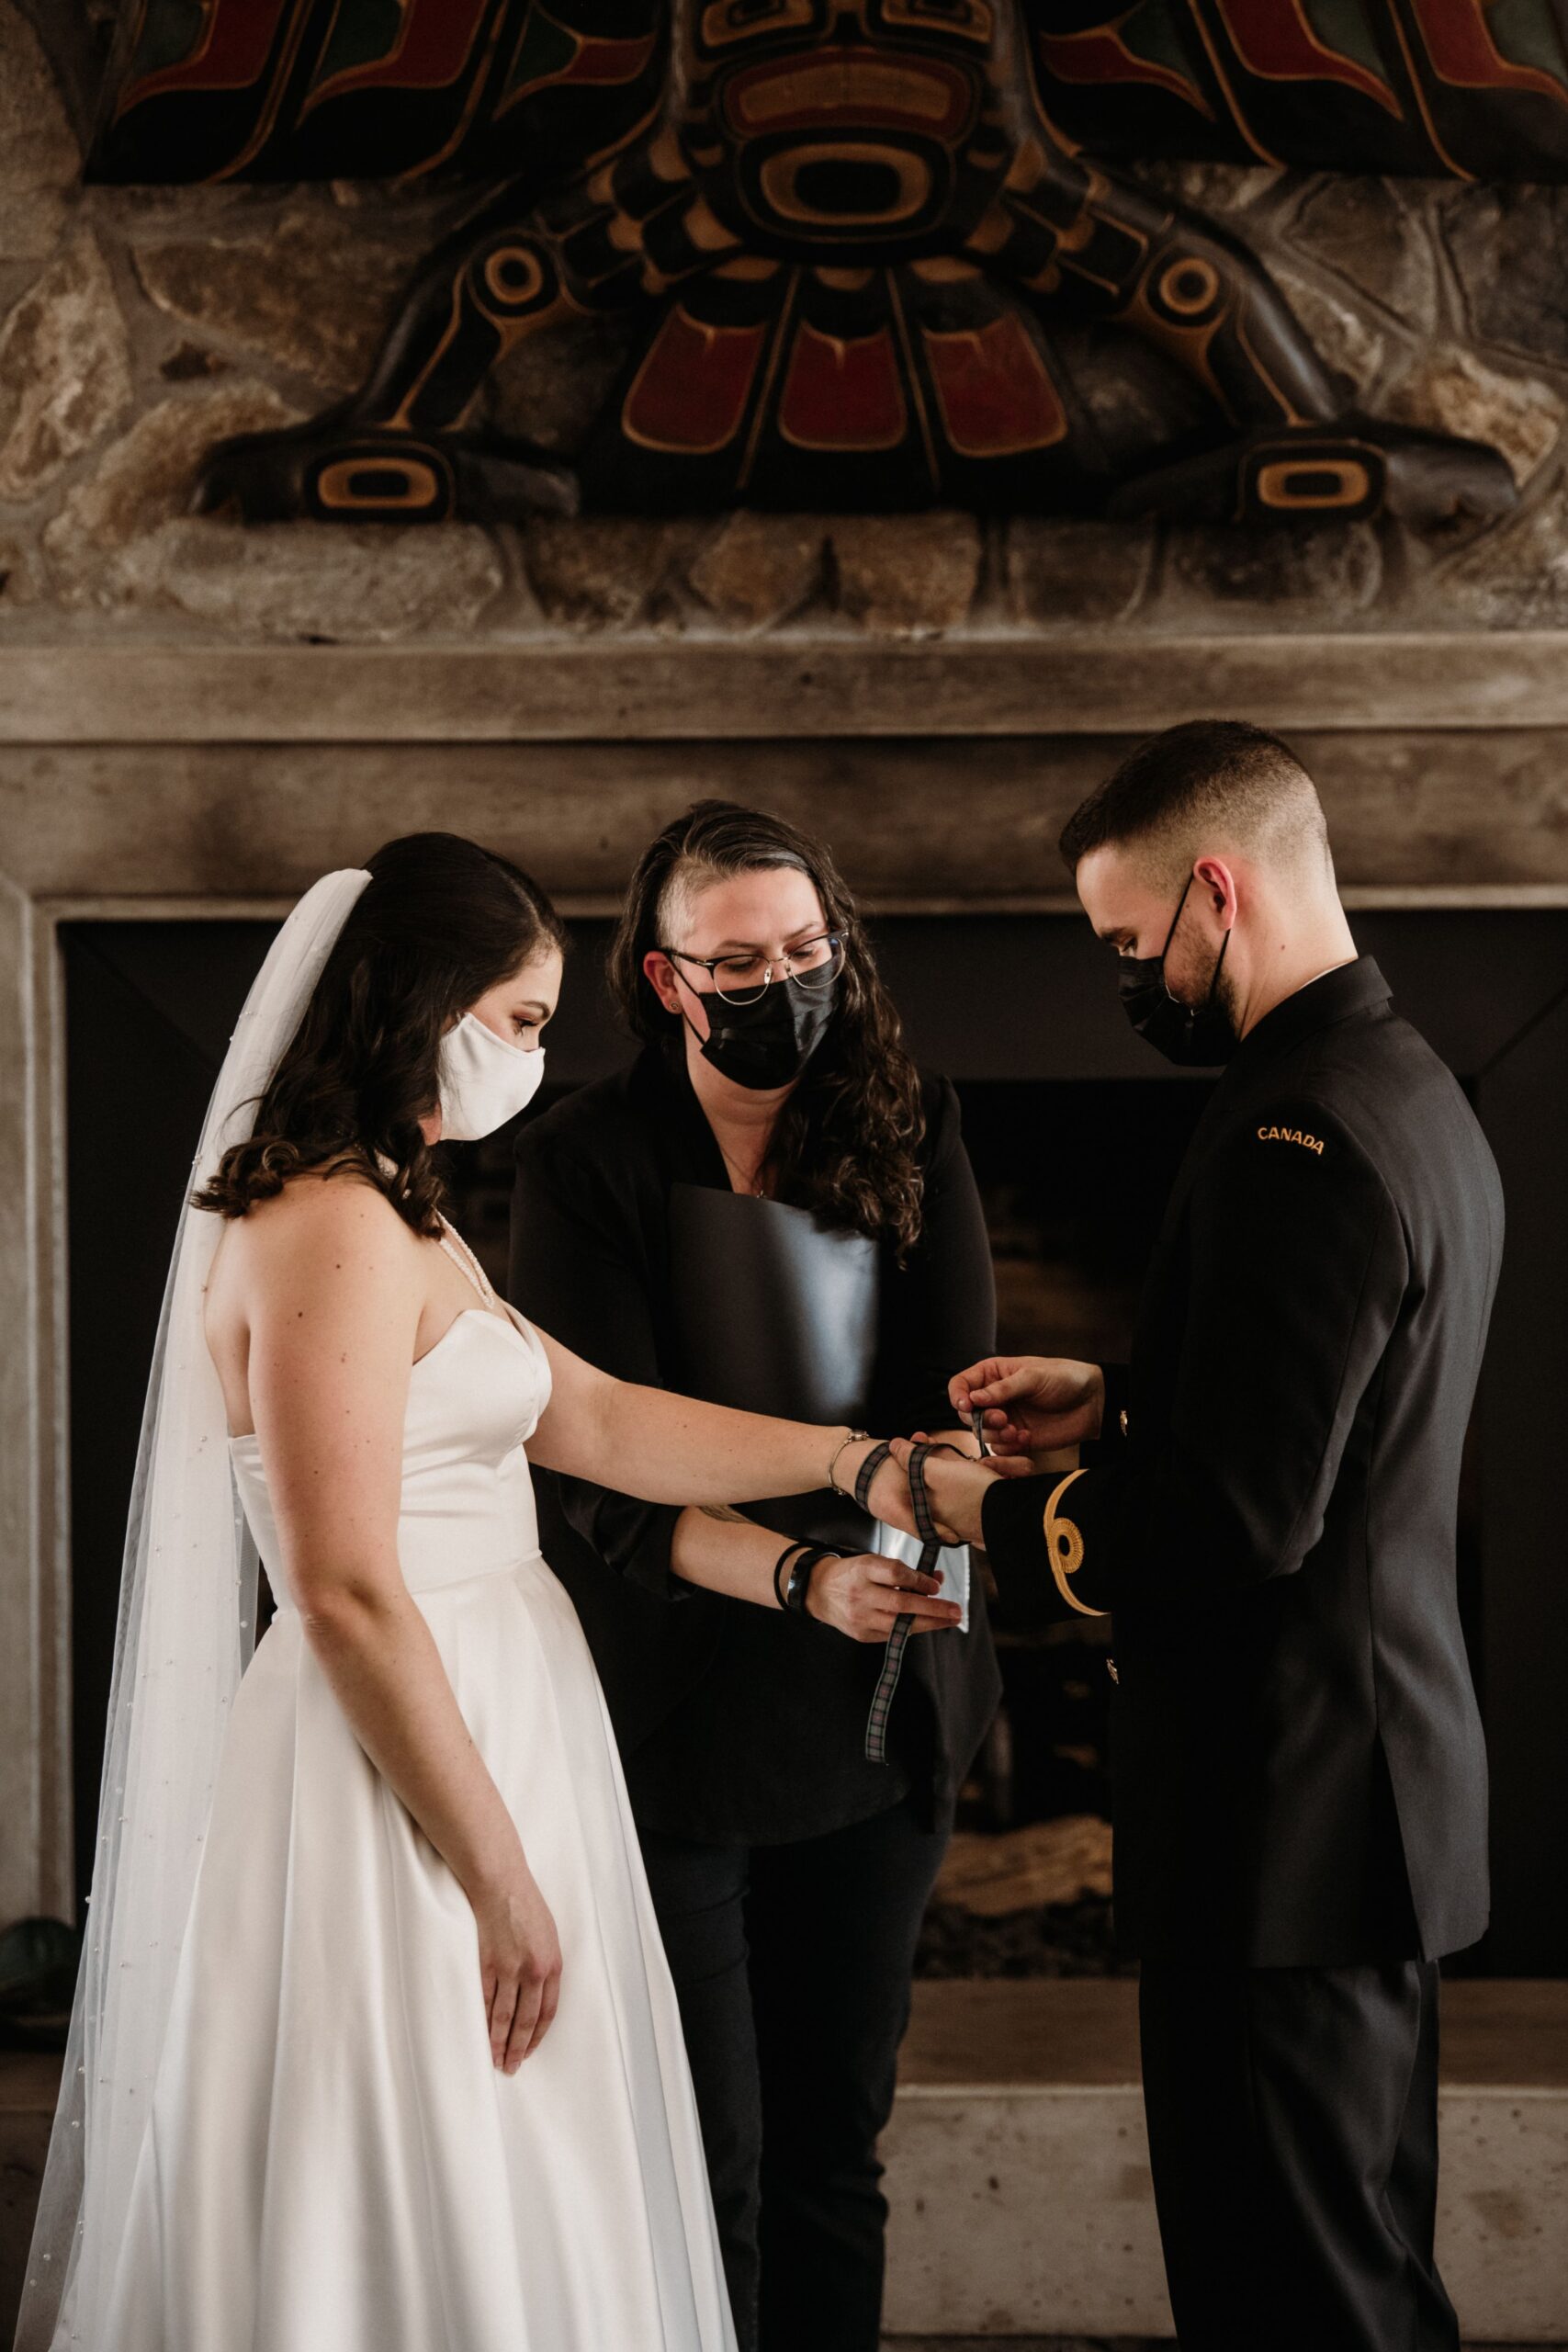 handfasting vows with young hip and married wedding ceremony